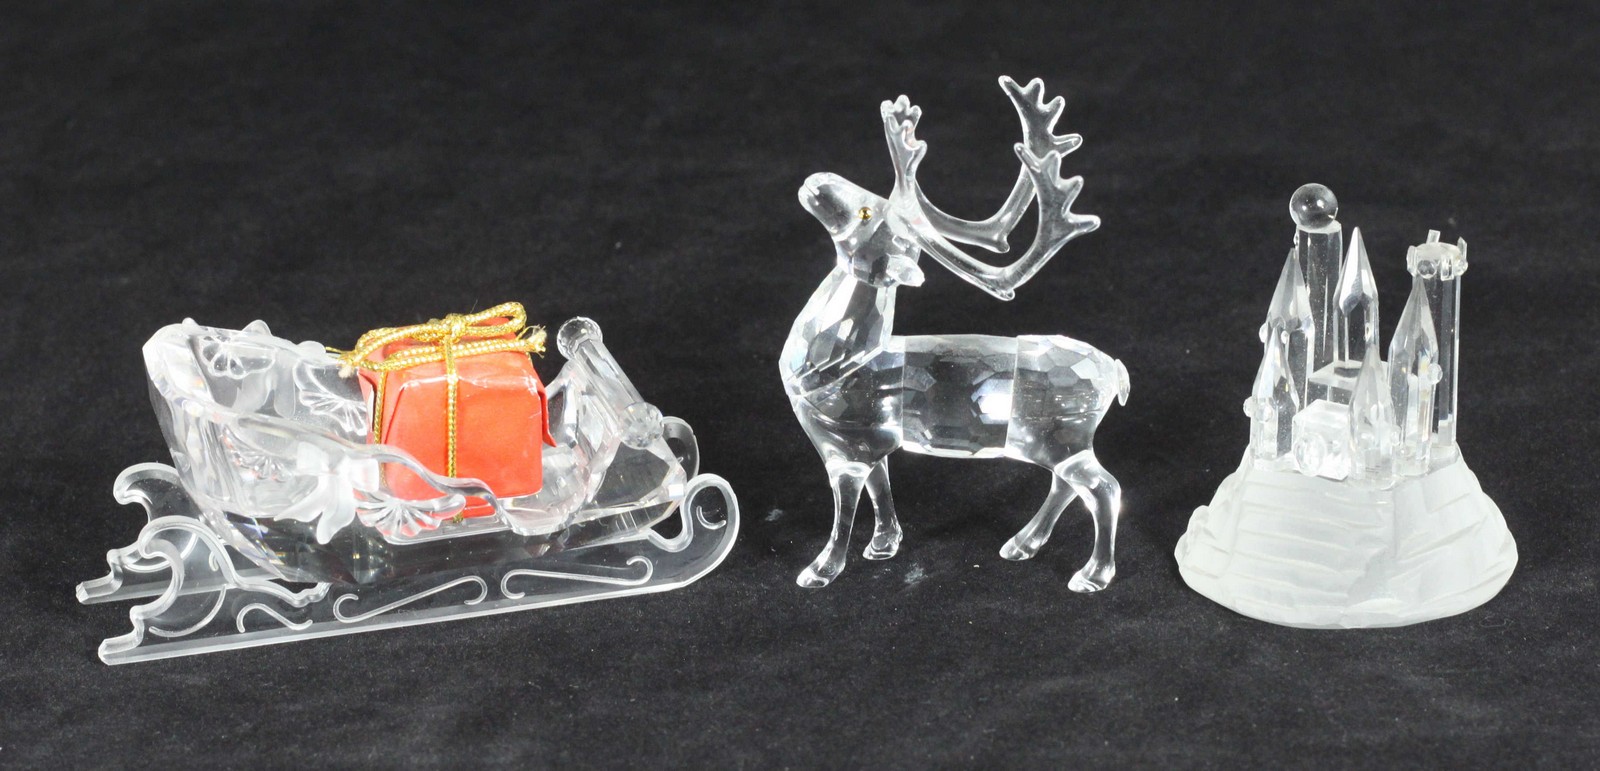 A Swarovski crystal model of a reindeer and sleigh with present, together with a Swarovski crystal